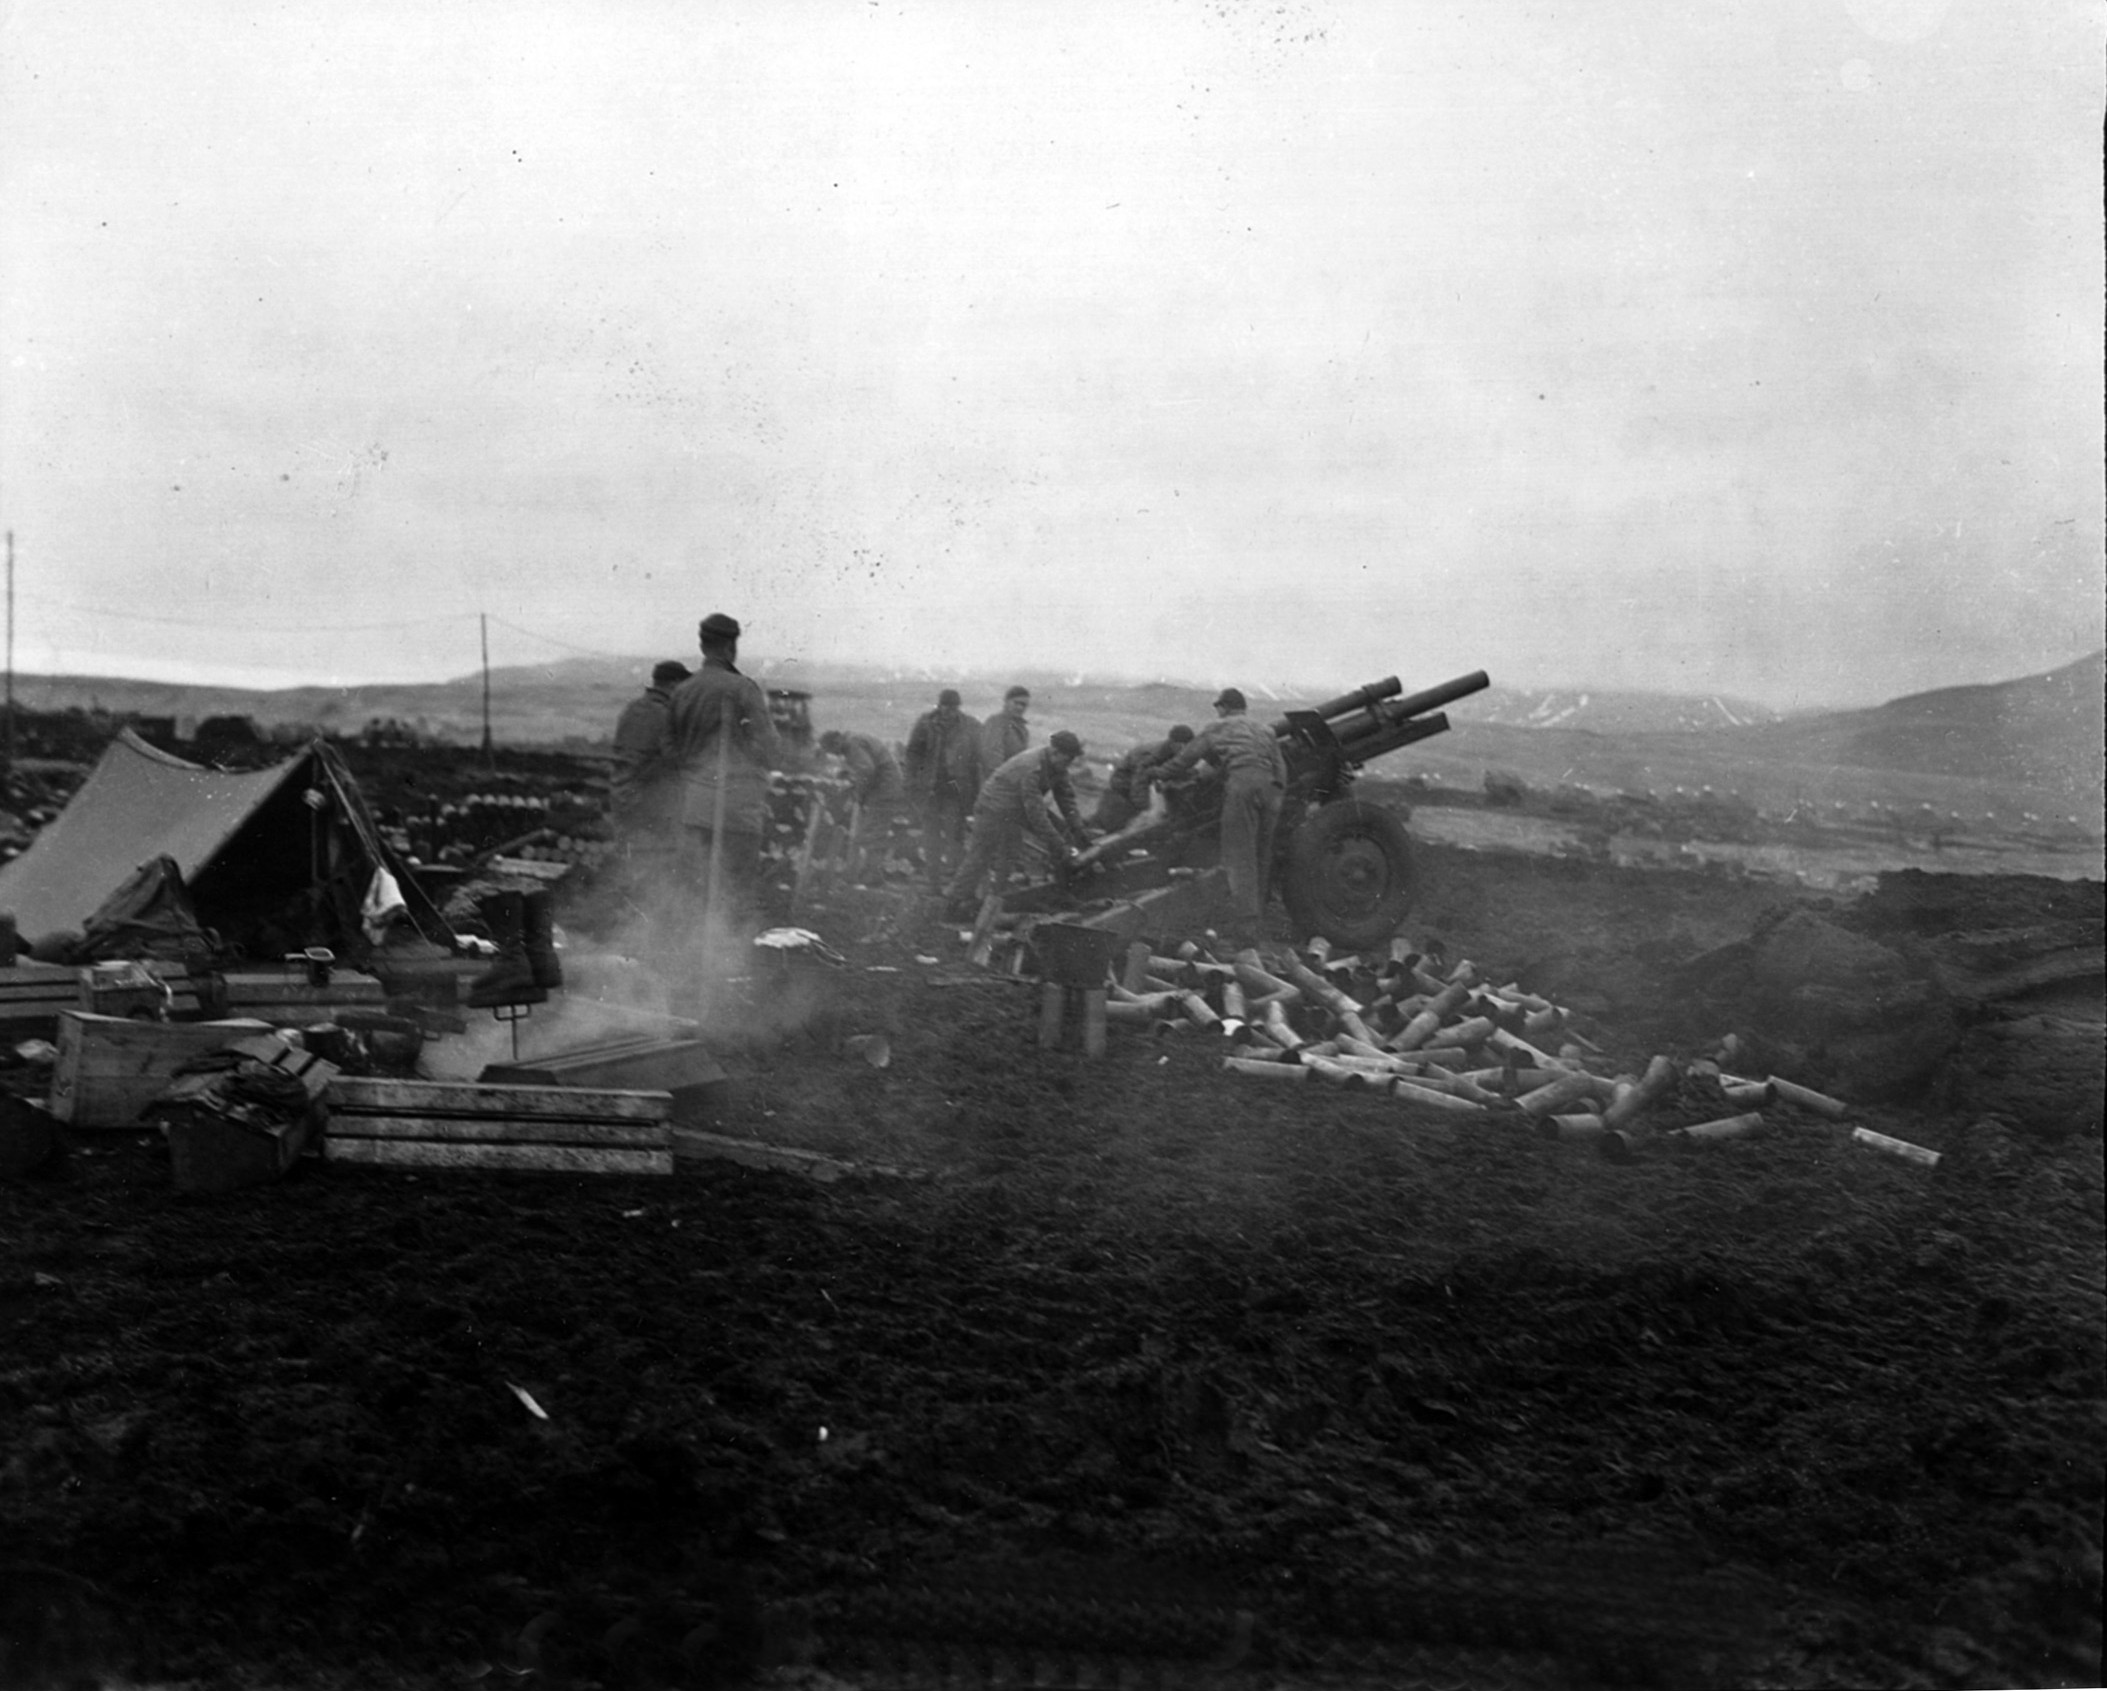 About 200 yards inland from a stormy beach on Attu, U.S. soldiers fire a 105mm howitzer against Japanese positions at Massacre Bay in May 1943.